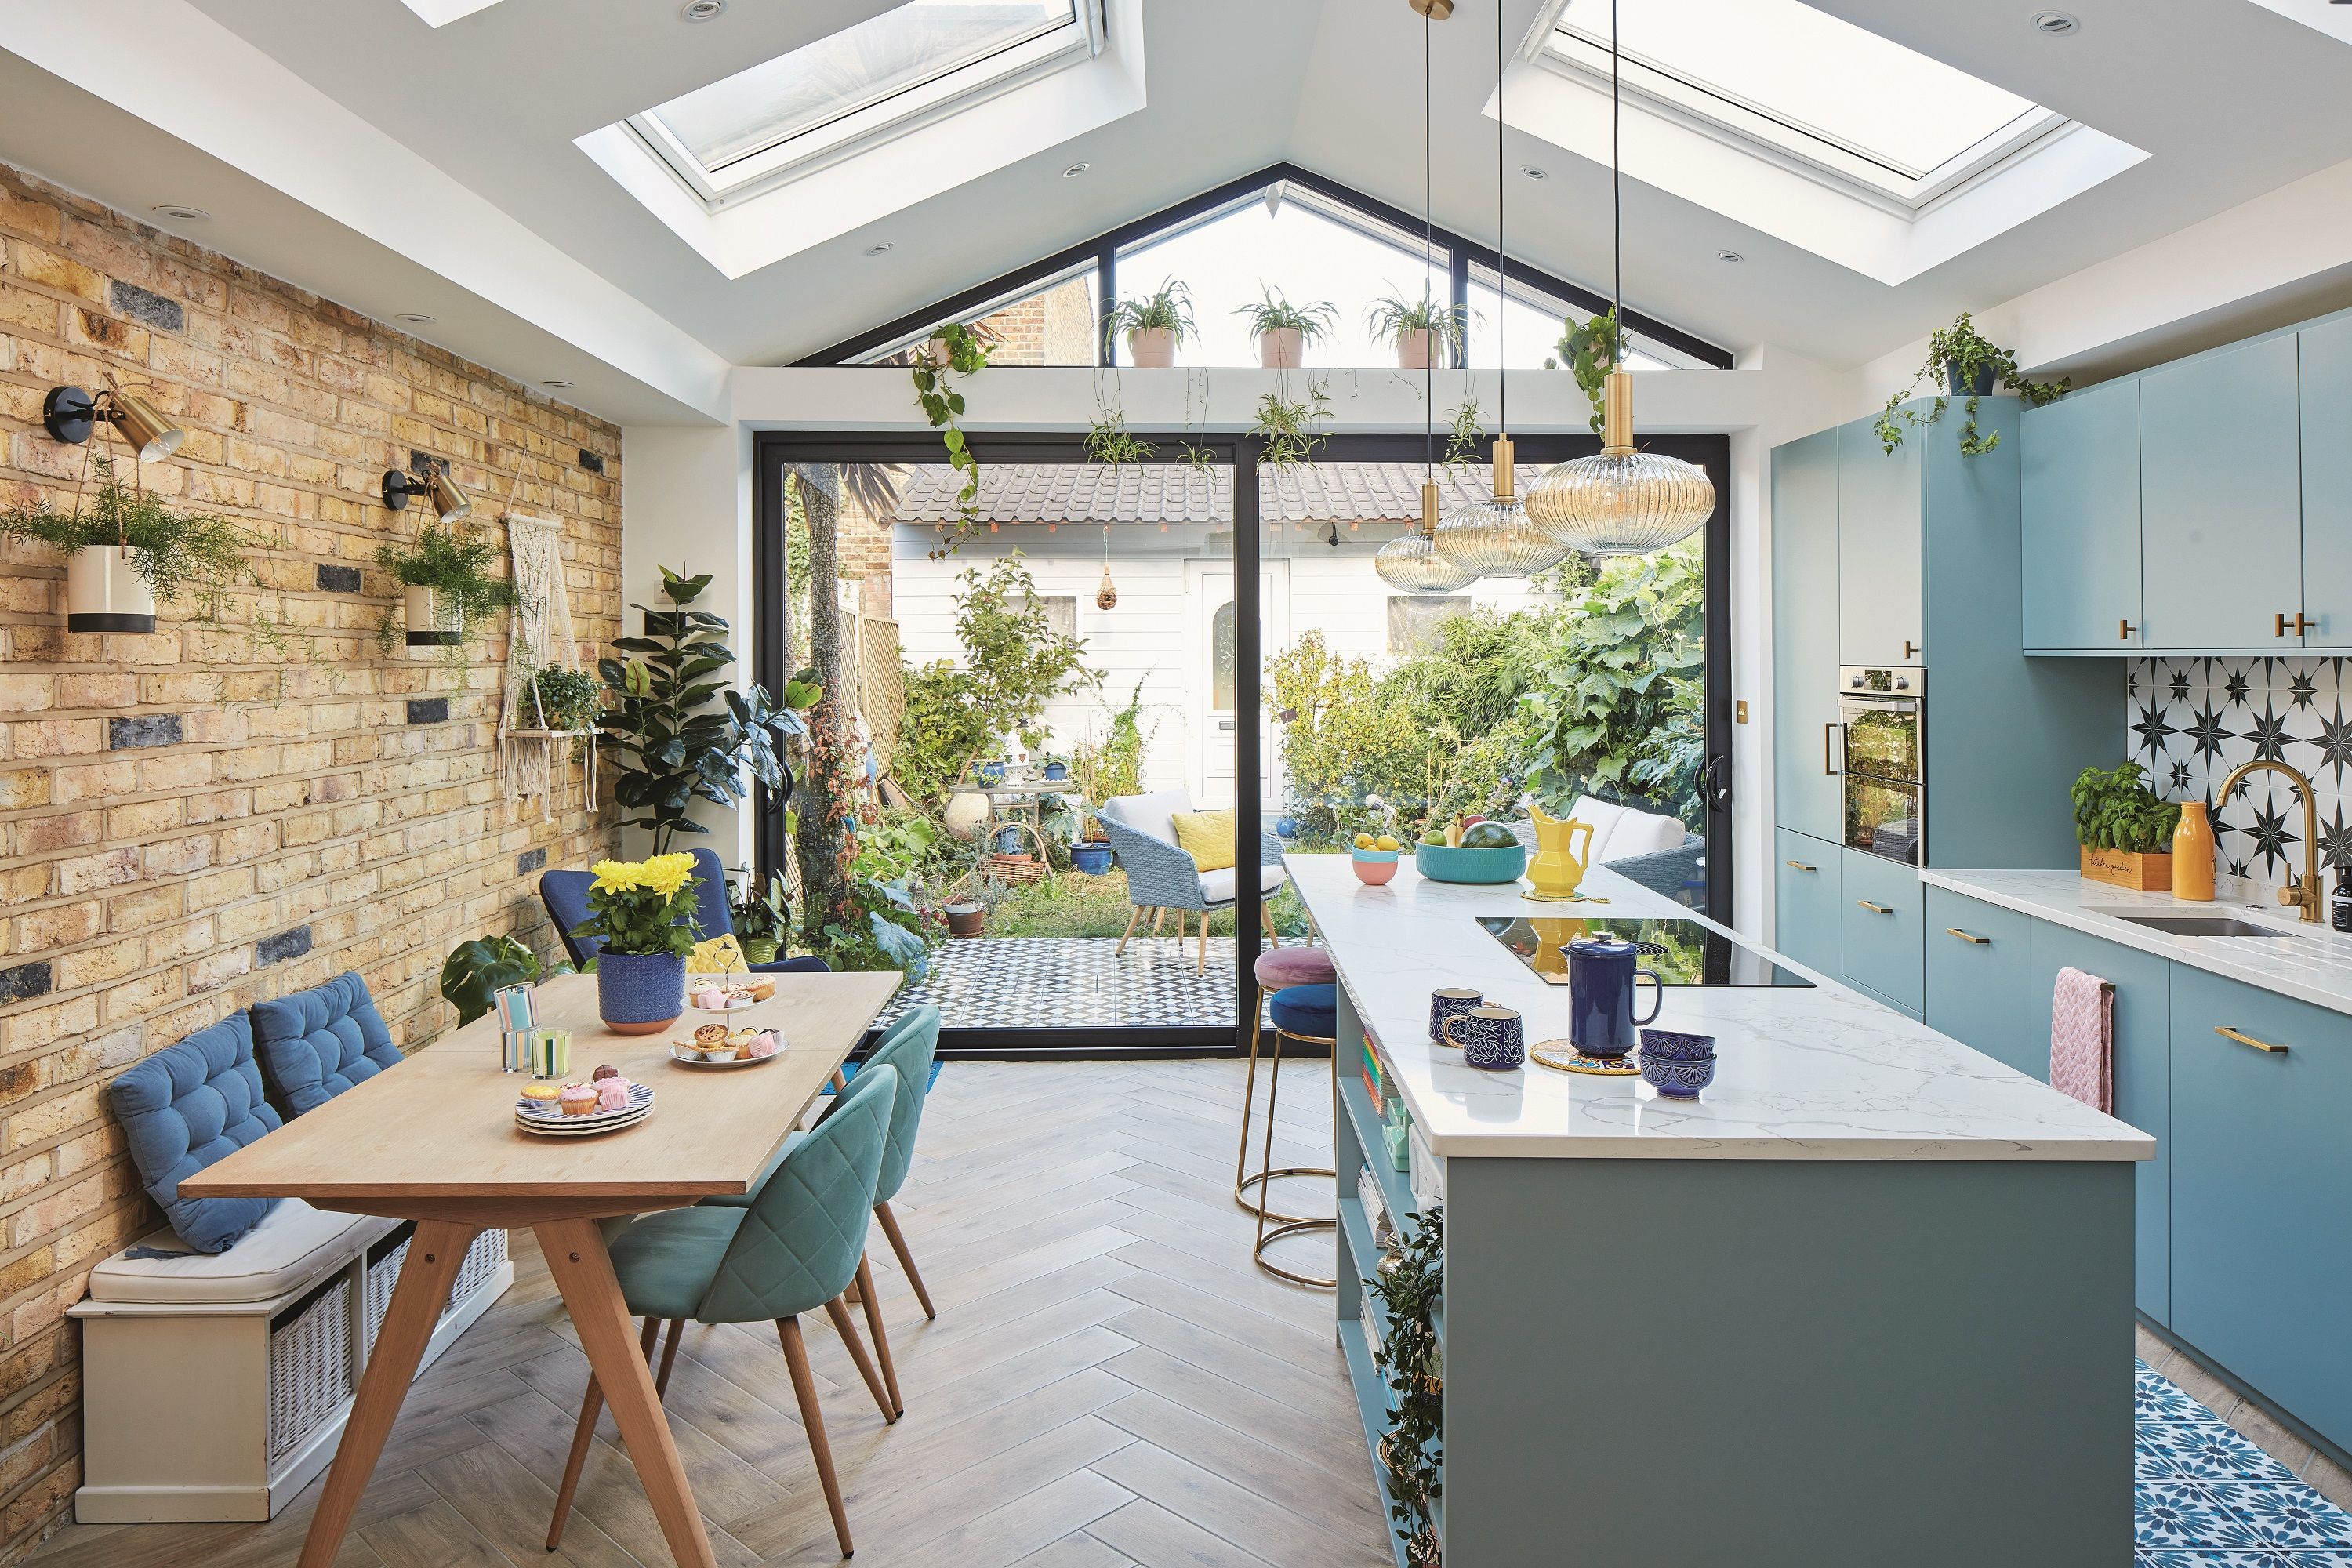 The essential homebuilding and renovating event in the heart of London